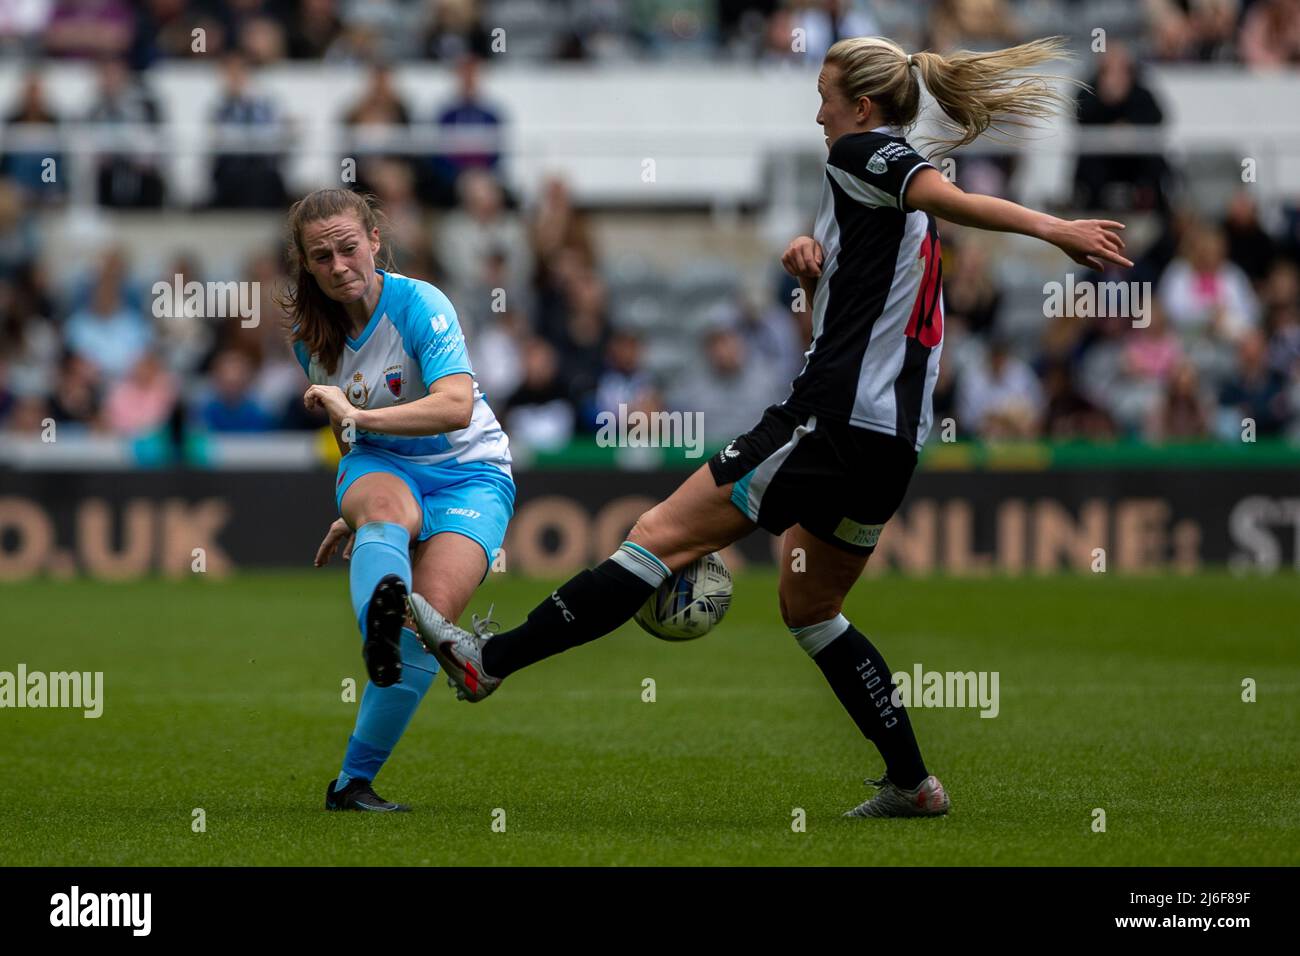 Action during the Womens National League game between Newcastle United and Alnwick at St James Park in Newcastle upon Tyne in England. The game was the first time Newcastle United Women played at St James Park Richard Callis/SPP Stock Photo